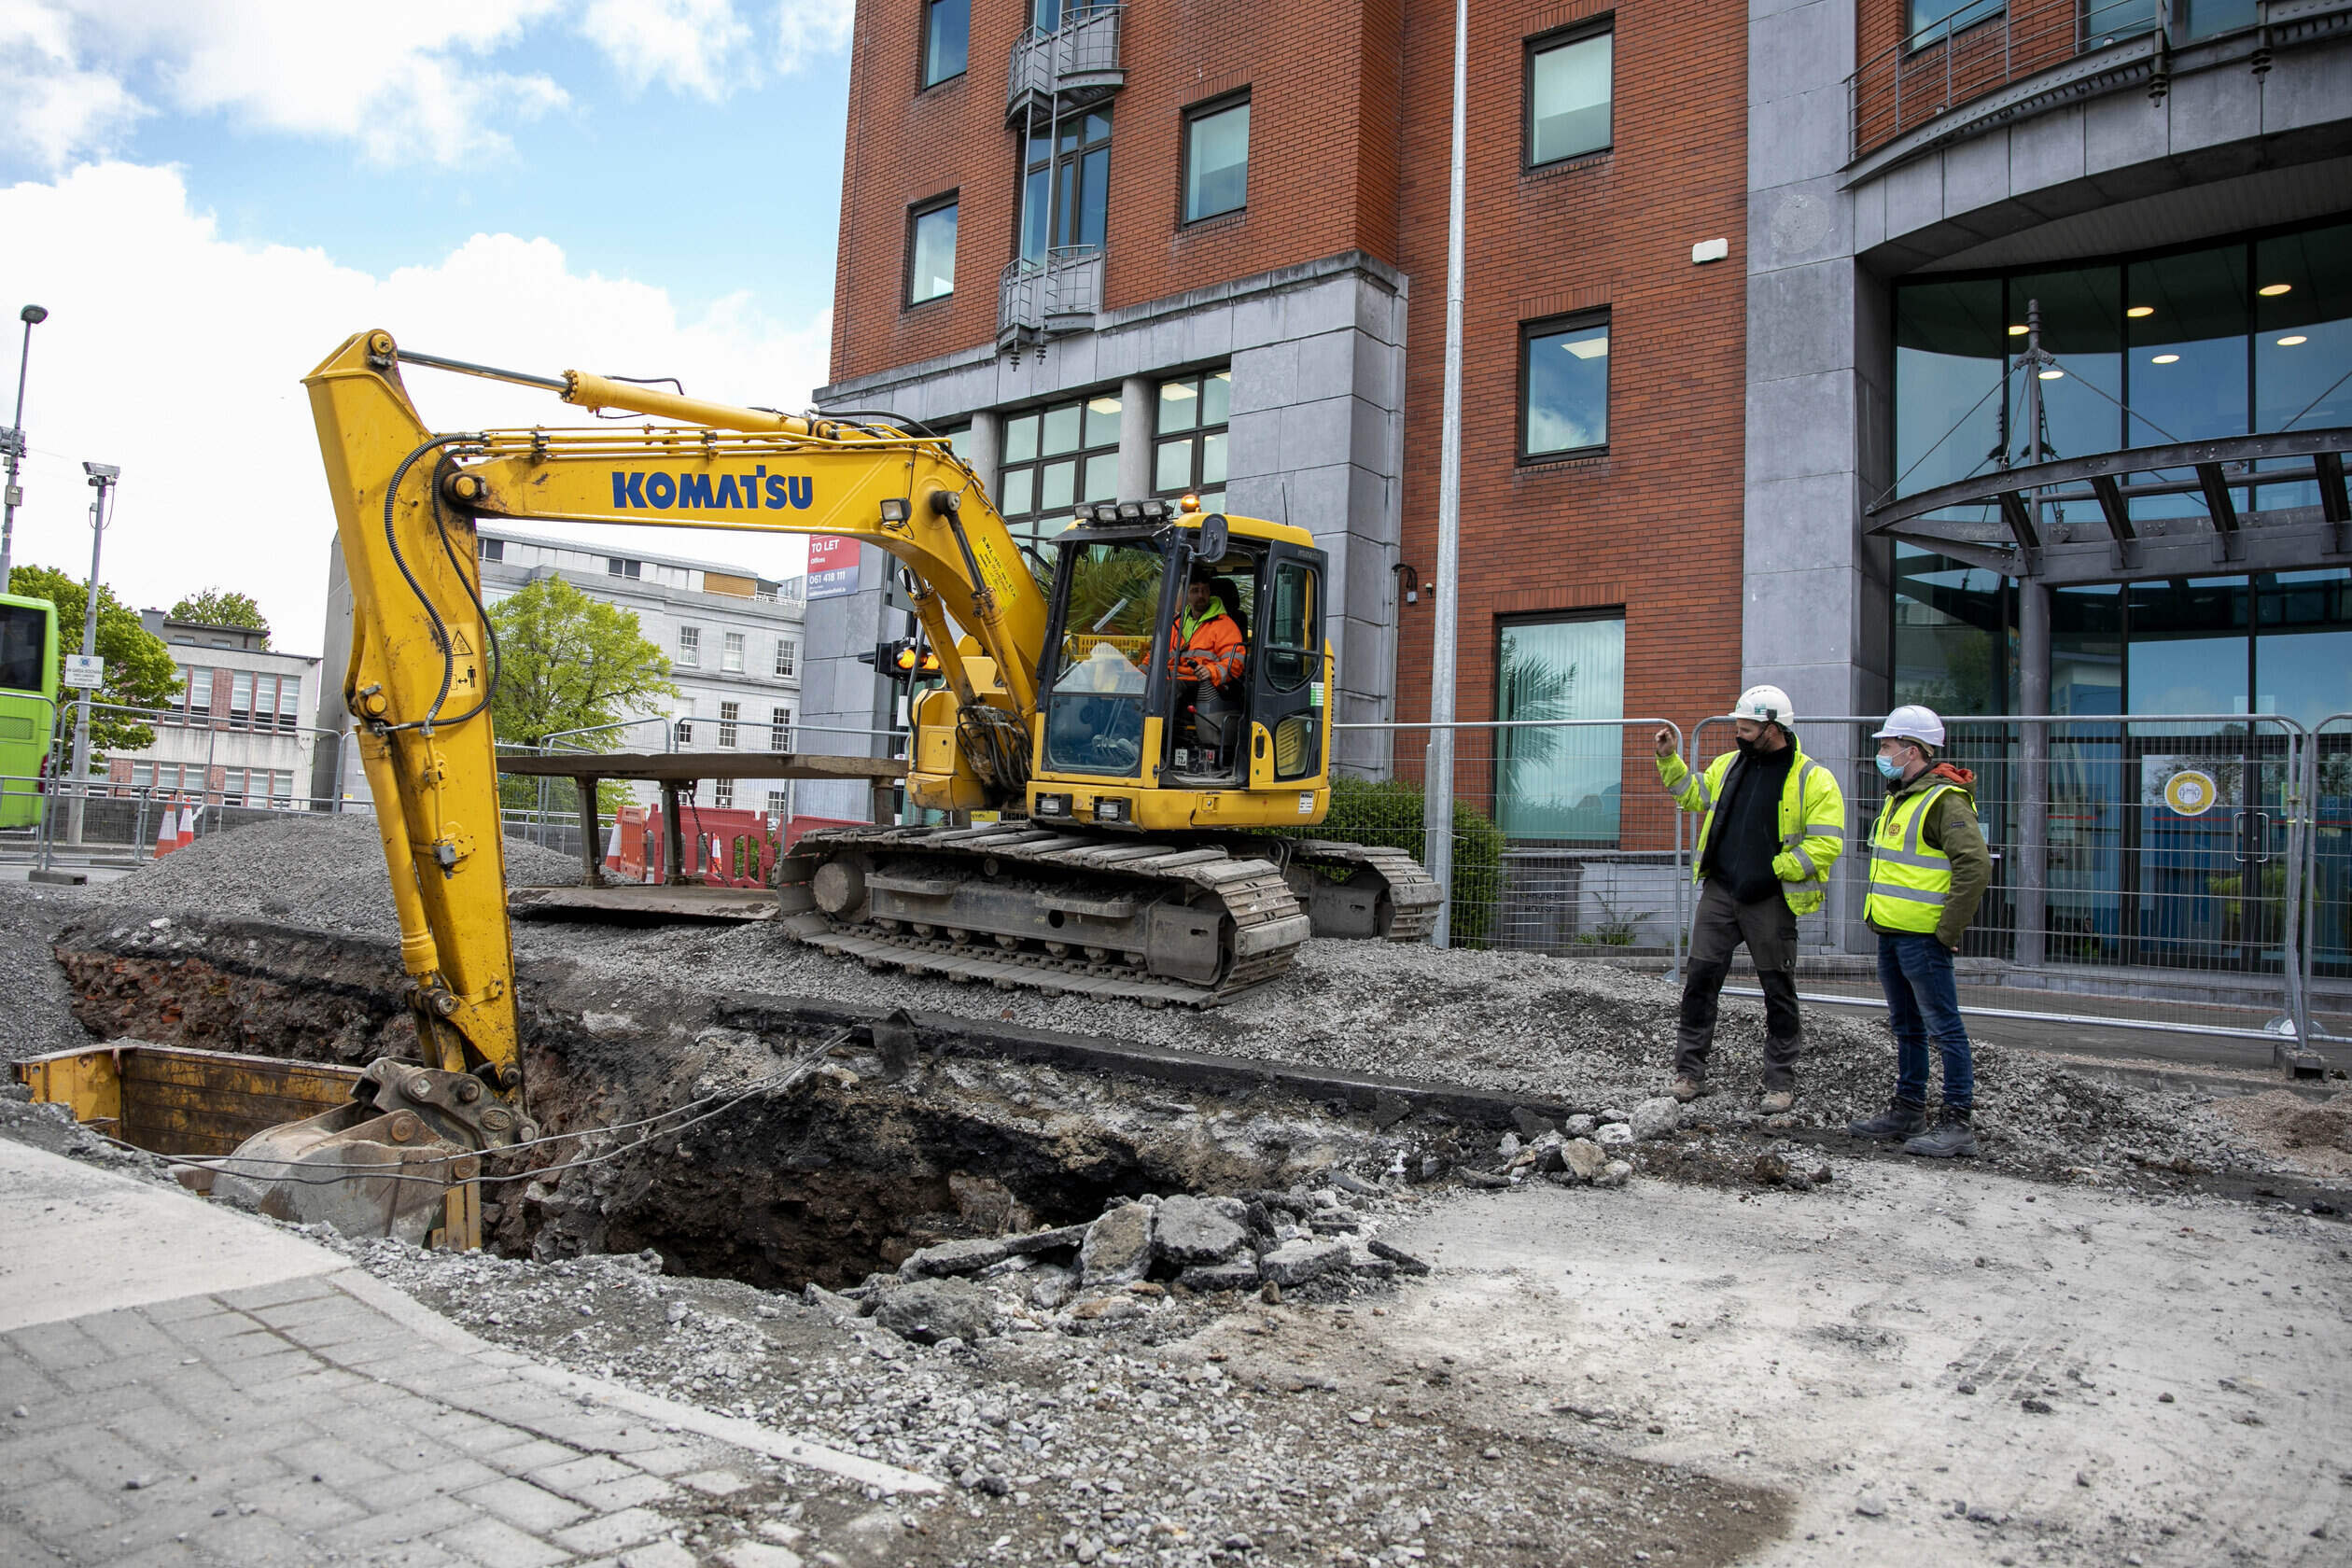 Opera Site demolition works recommence as Limerick 2030, Cogent Associates and John Sysk & Son Ltd continue their works on the biggest commercial property development ever in Limerick.